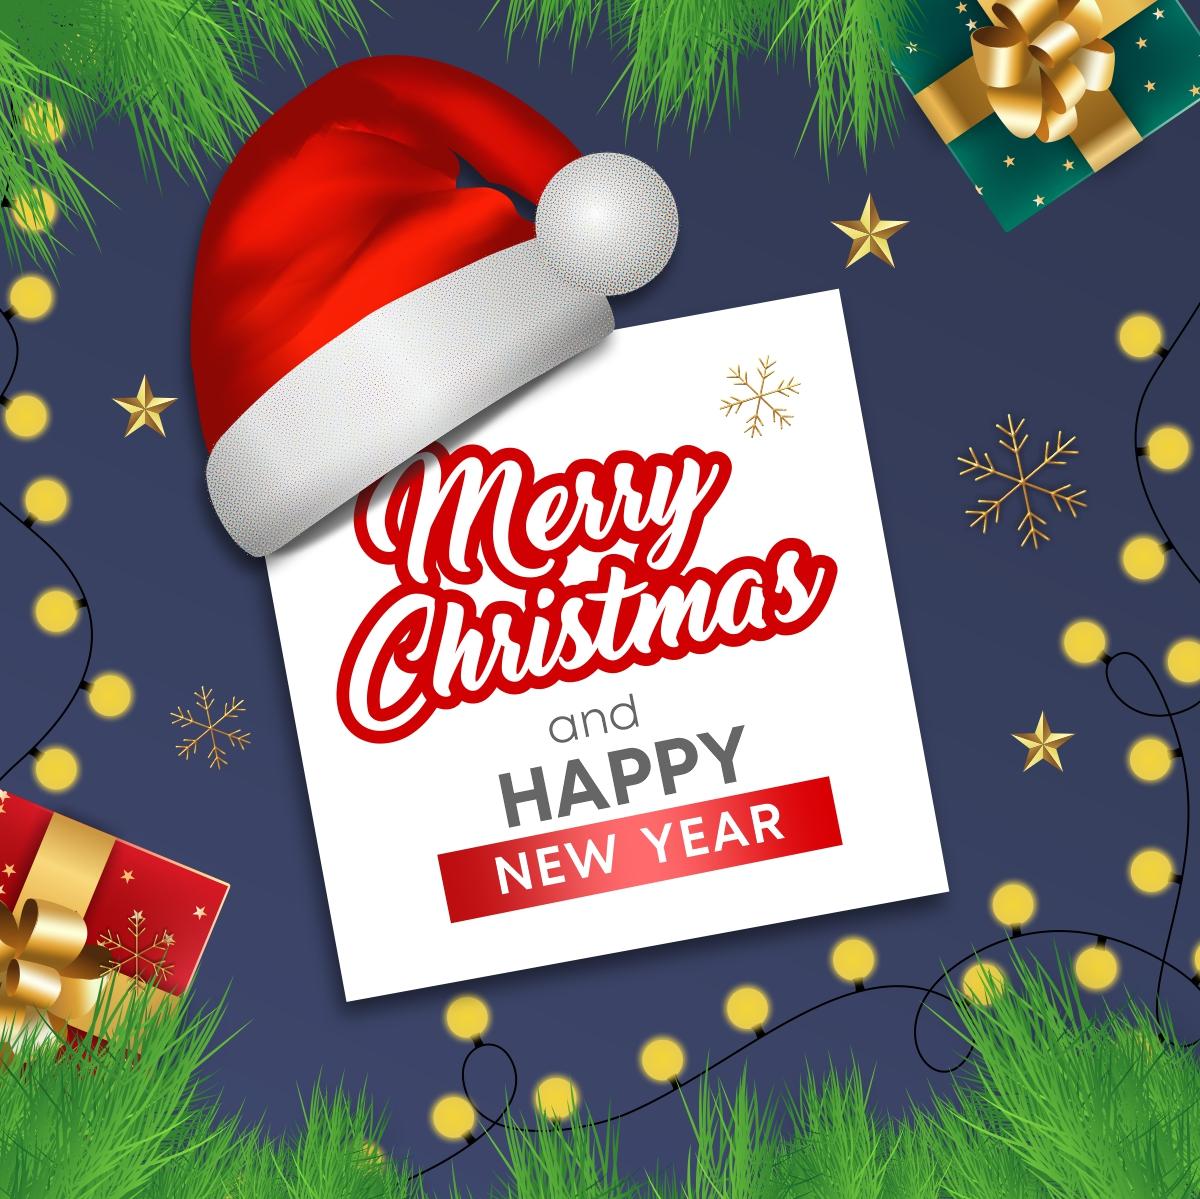 Download Merry Christmas and Happy New Year Greeting Card Xmas